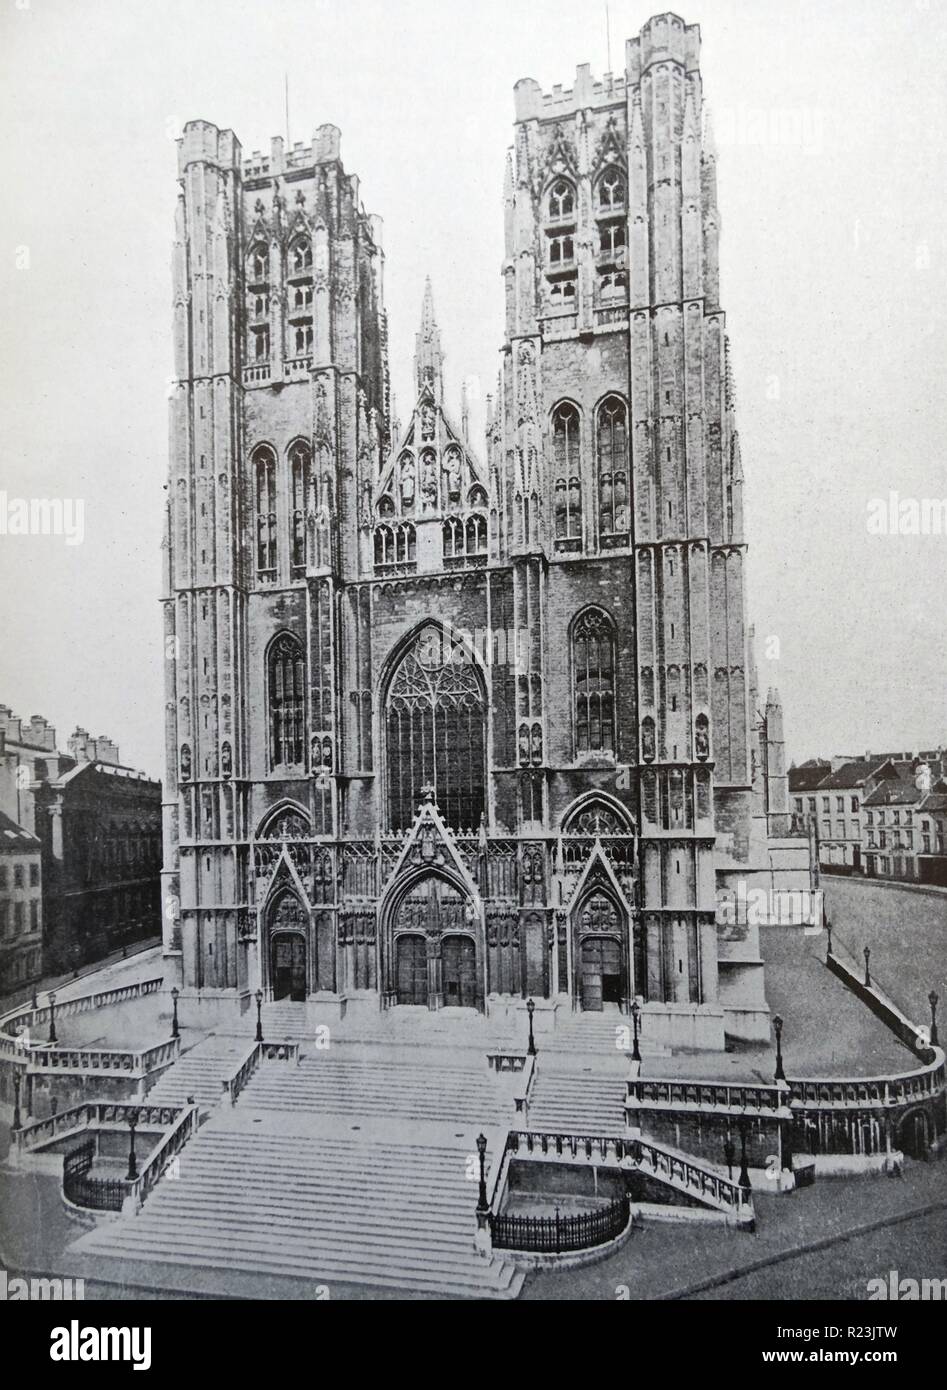 The Great Church of St. Michael and Ste. Gudule, the focus of the national life of Brabant. It has witnessed the struggles and triumphs of Brussels since that city first emerged from obscurity. Belgium's national church, host to royal weddings and funerals, built in the Brabant Gothic style. Dated 1519. Stock Photo